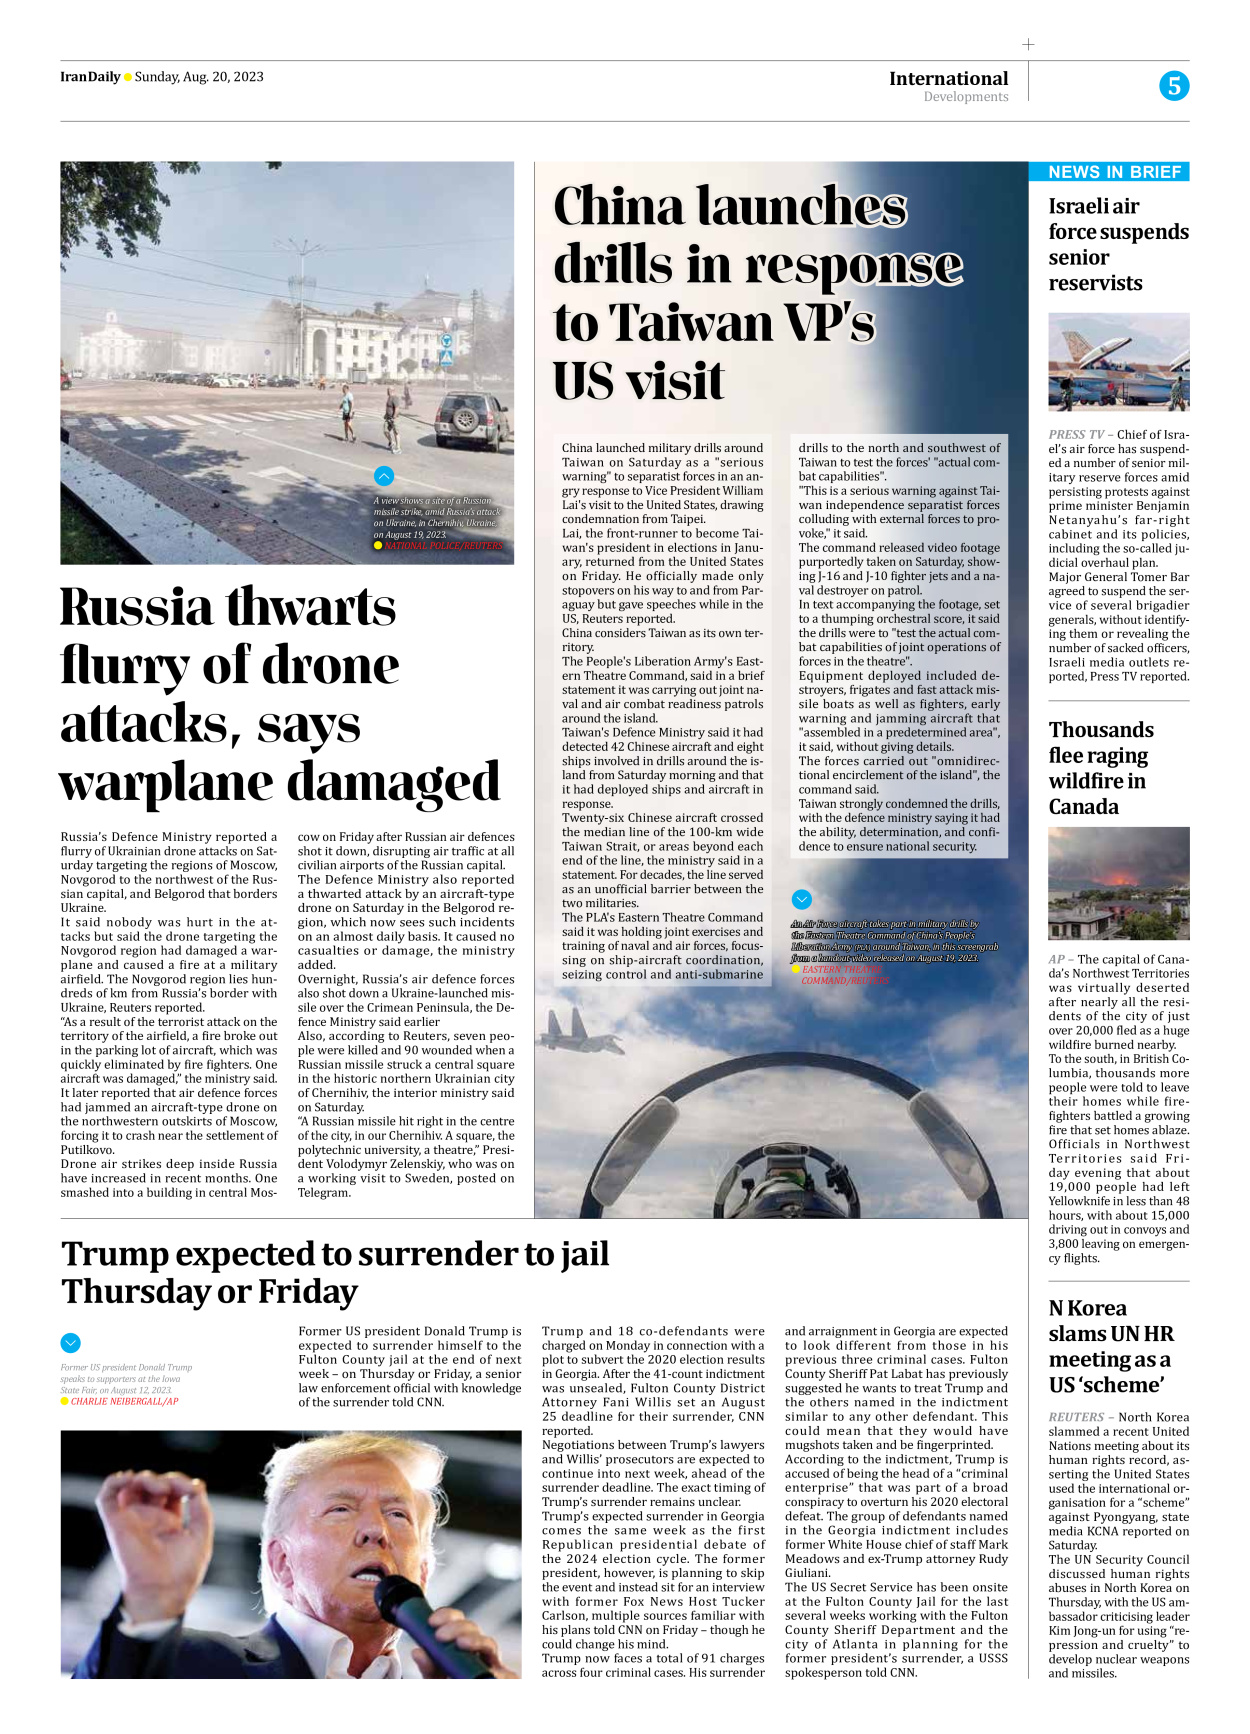 Iran Daily - Number Seven Thousand Three Hundred and Sixty Seven - 20 August 2023 - Page 5